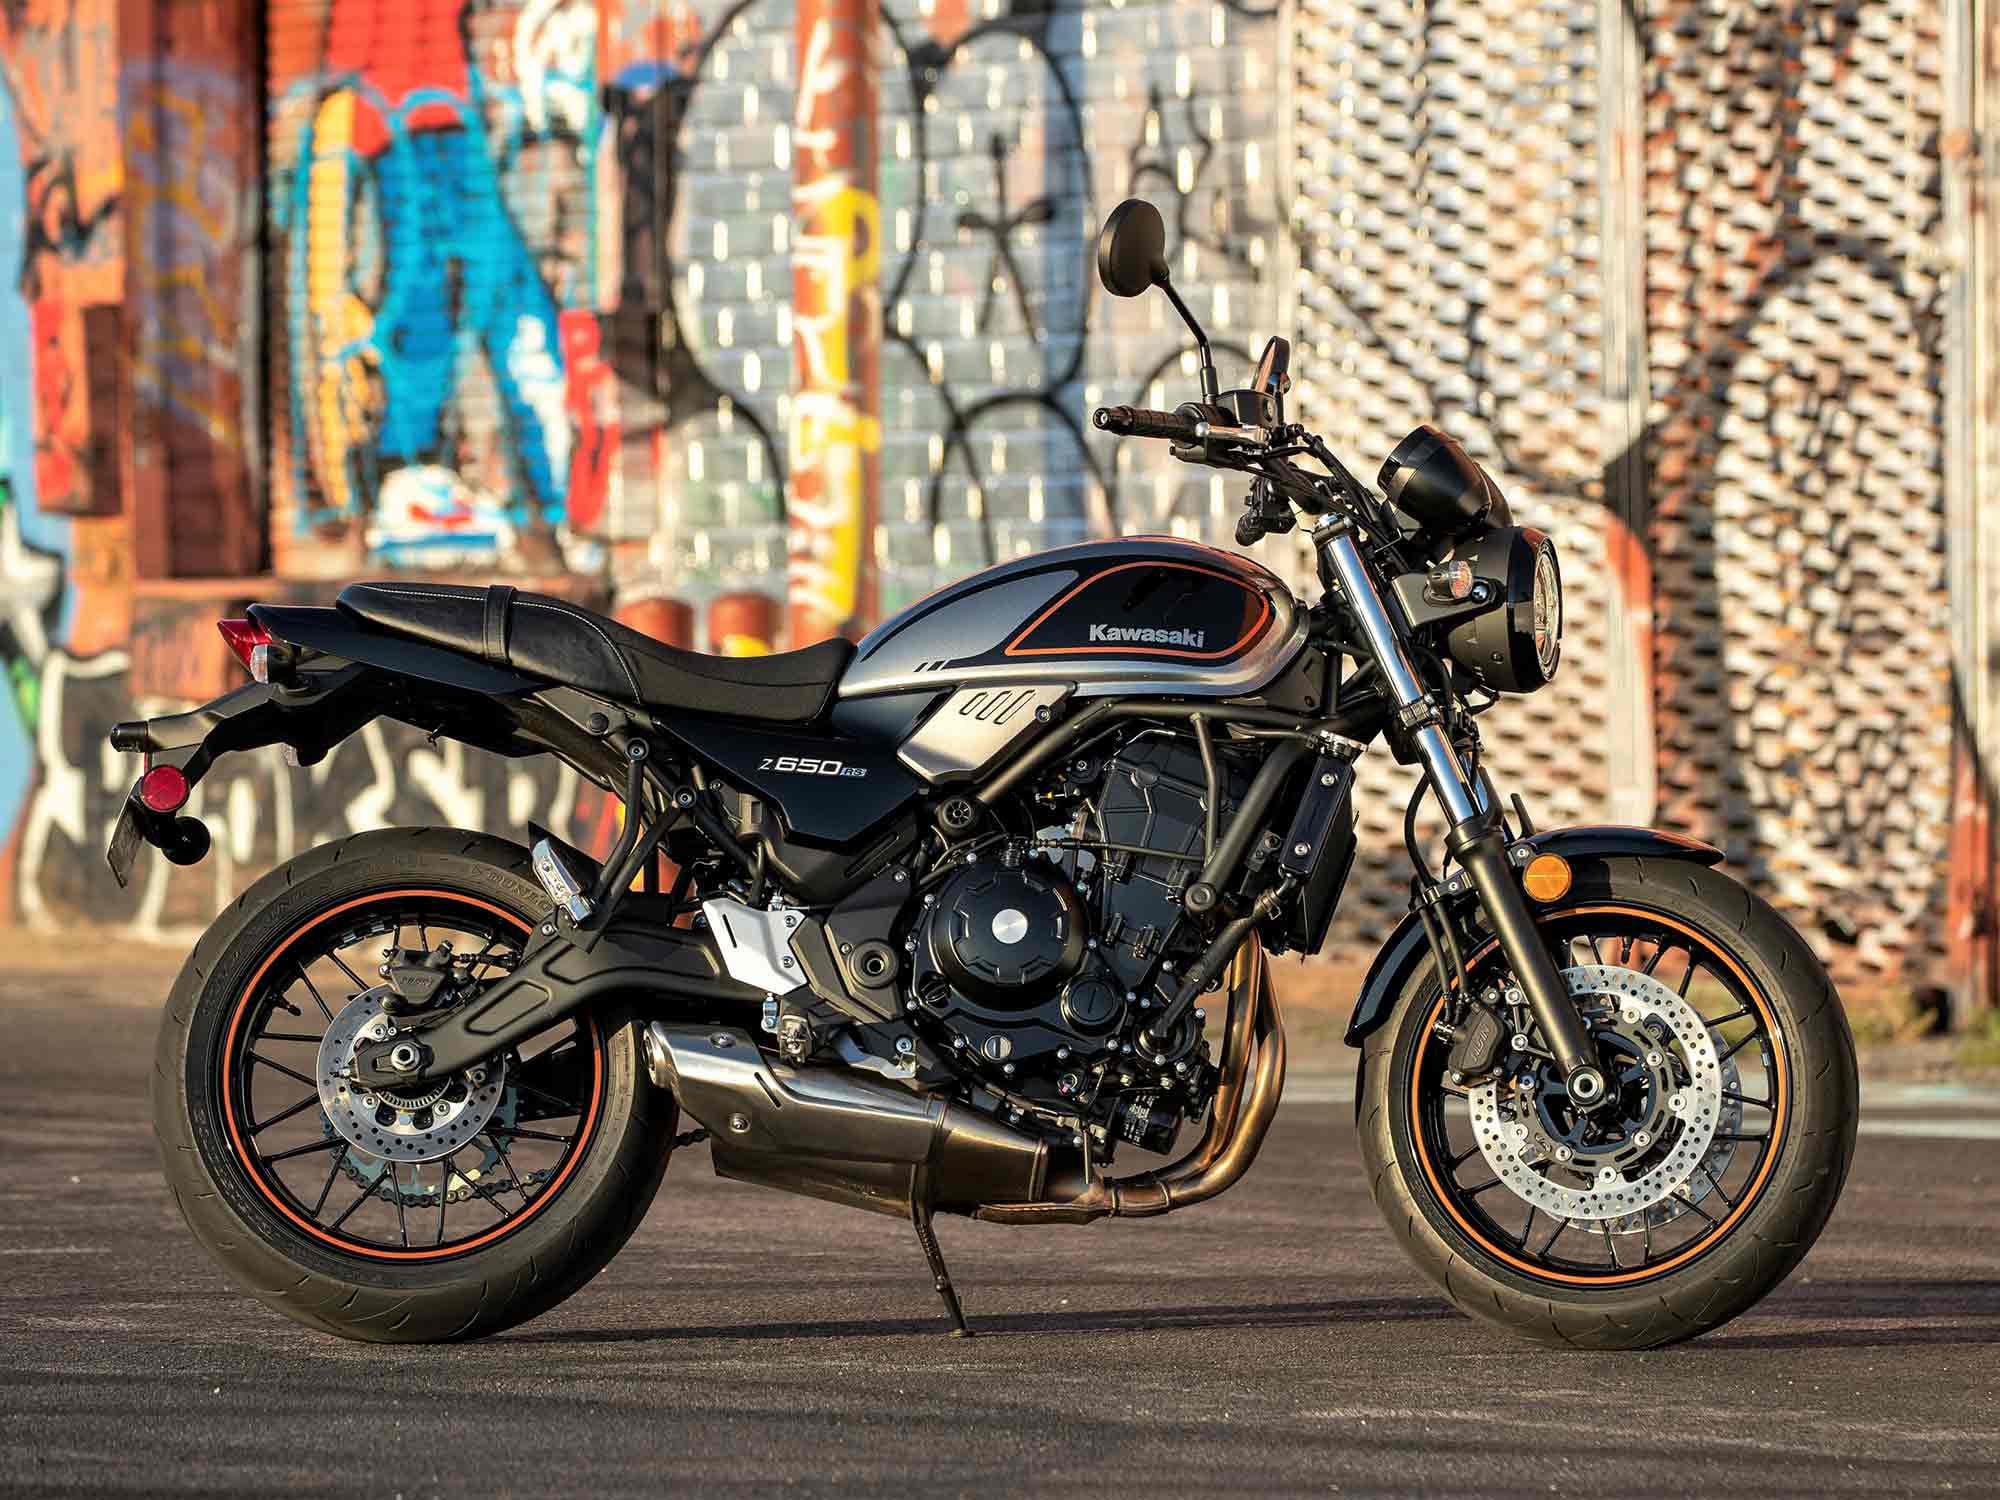 The Z650RS is banking on its punchy but nonintimidating engine, relaxed ergos, and sharp 1970s vintage styling.